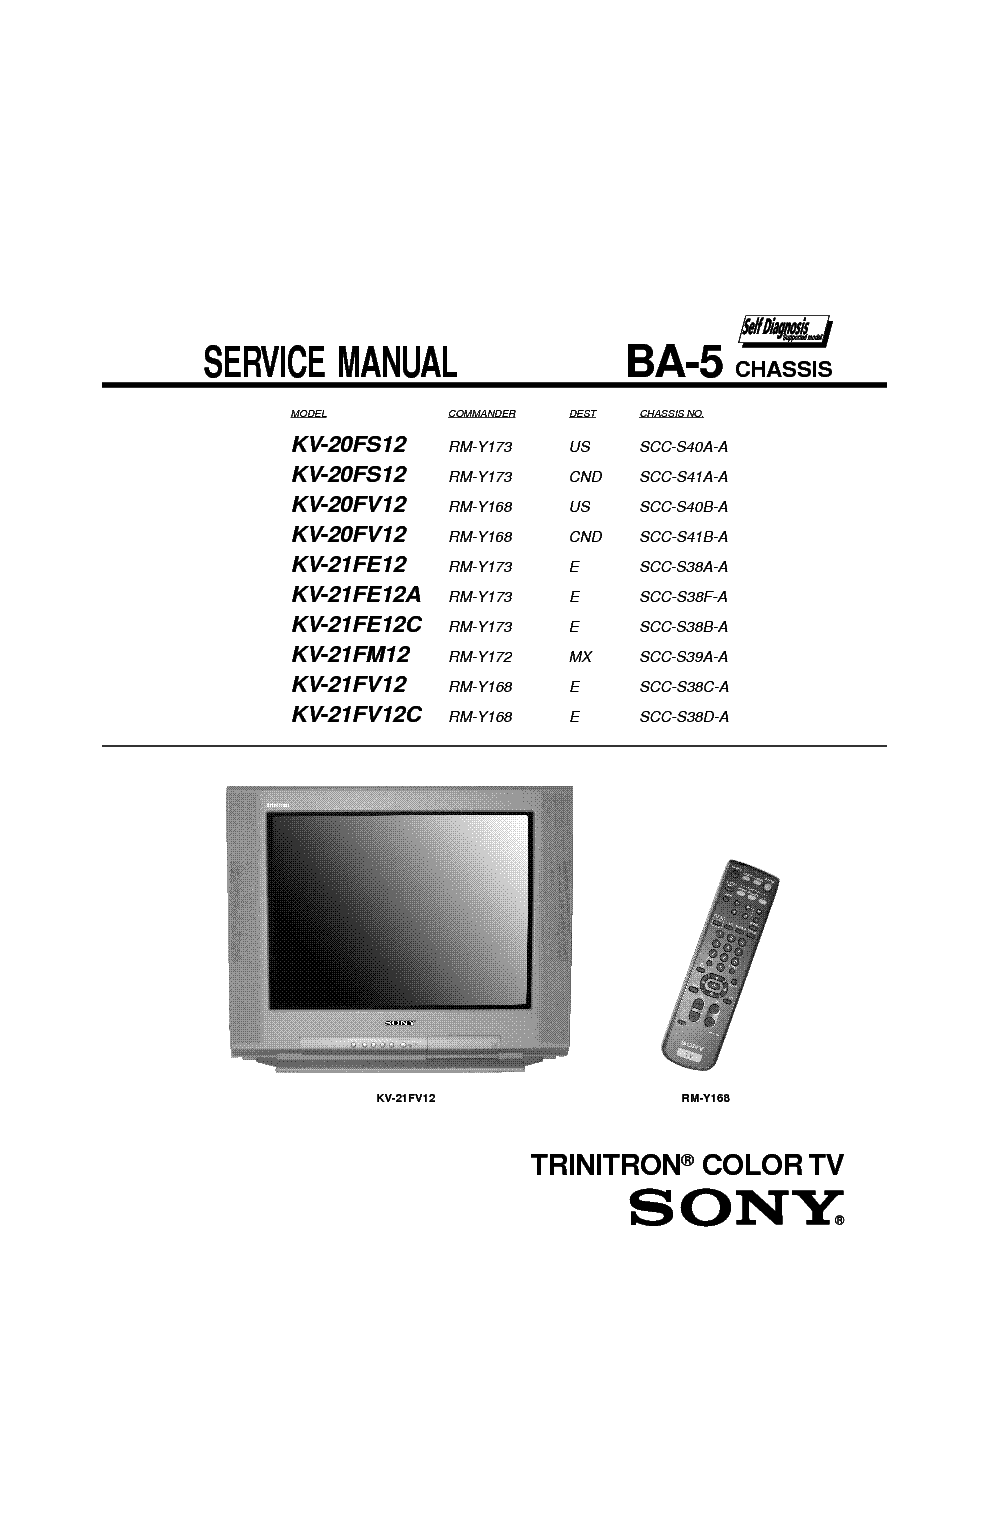 SONY KV-20FS12 20FV12 21FE12-A-C 21FM12 21FV12-C CHASSIS BA-5 SM service manual (1st page)